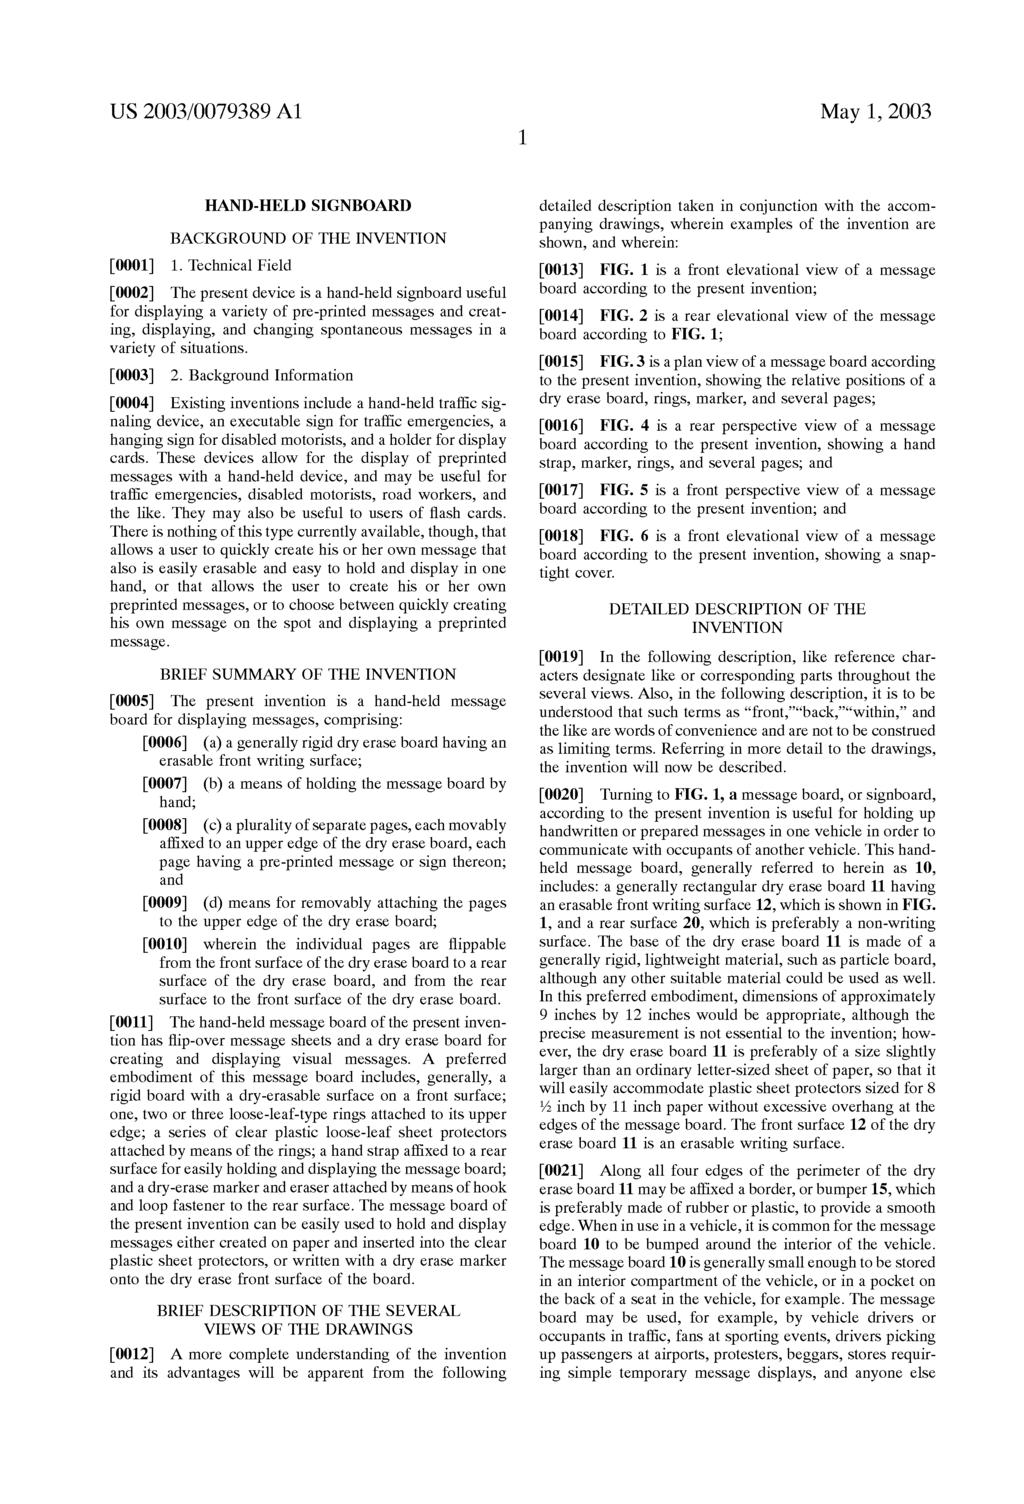 US 2003/0079389 A1 May 1, 2003 HAD-HELD SIGBOARD BACKGROUD OF THE IVETIO 0001) 1.